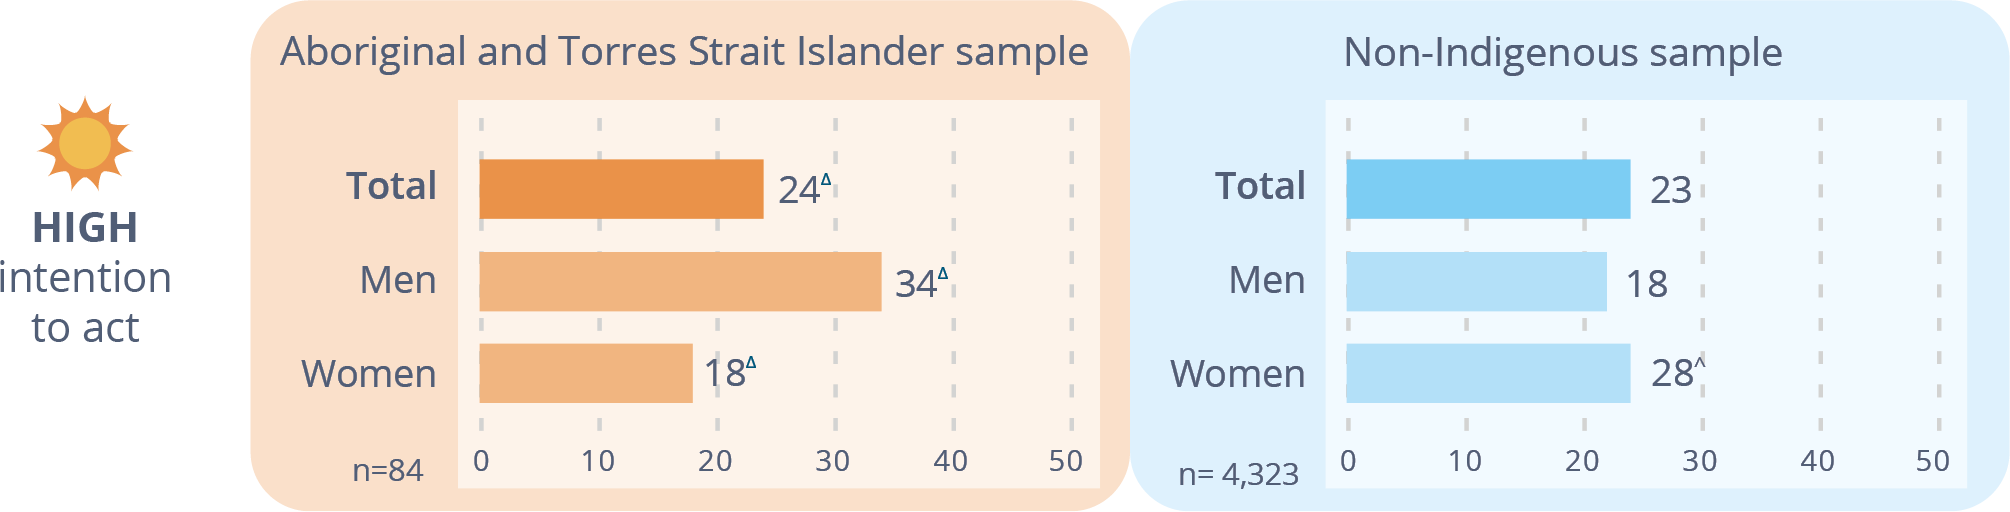 Figure 4-9: Relative intention to act, Aboriginal and Torres Strait Islander and non-indigenous samples, 2017 (%) Data table below